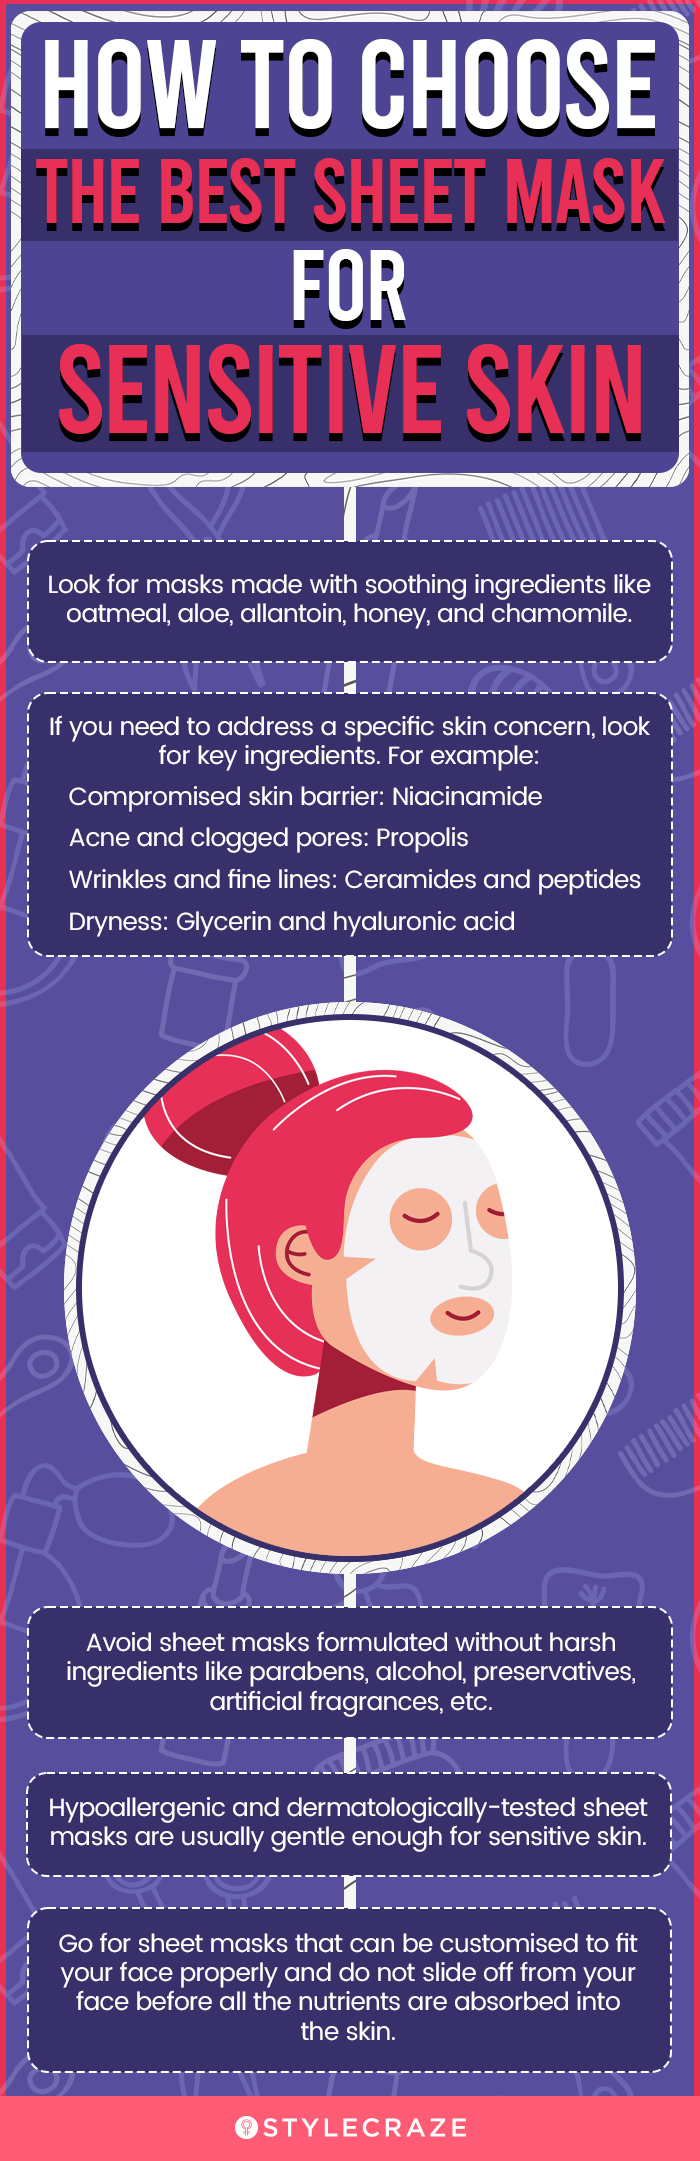 How To Choose The Best Sheet Mask For Sensitive Skin (infographic)